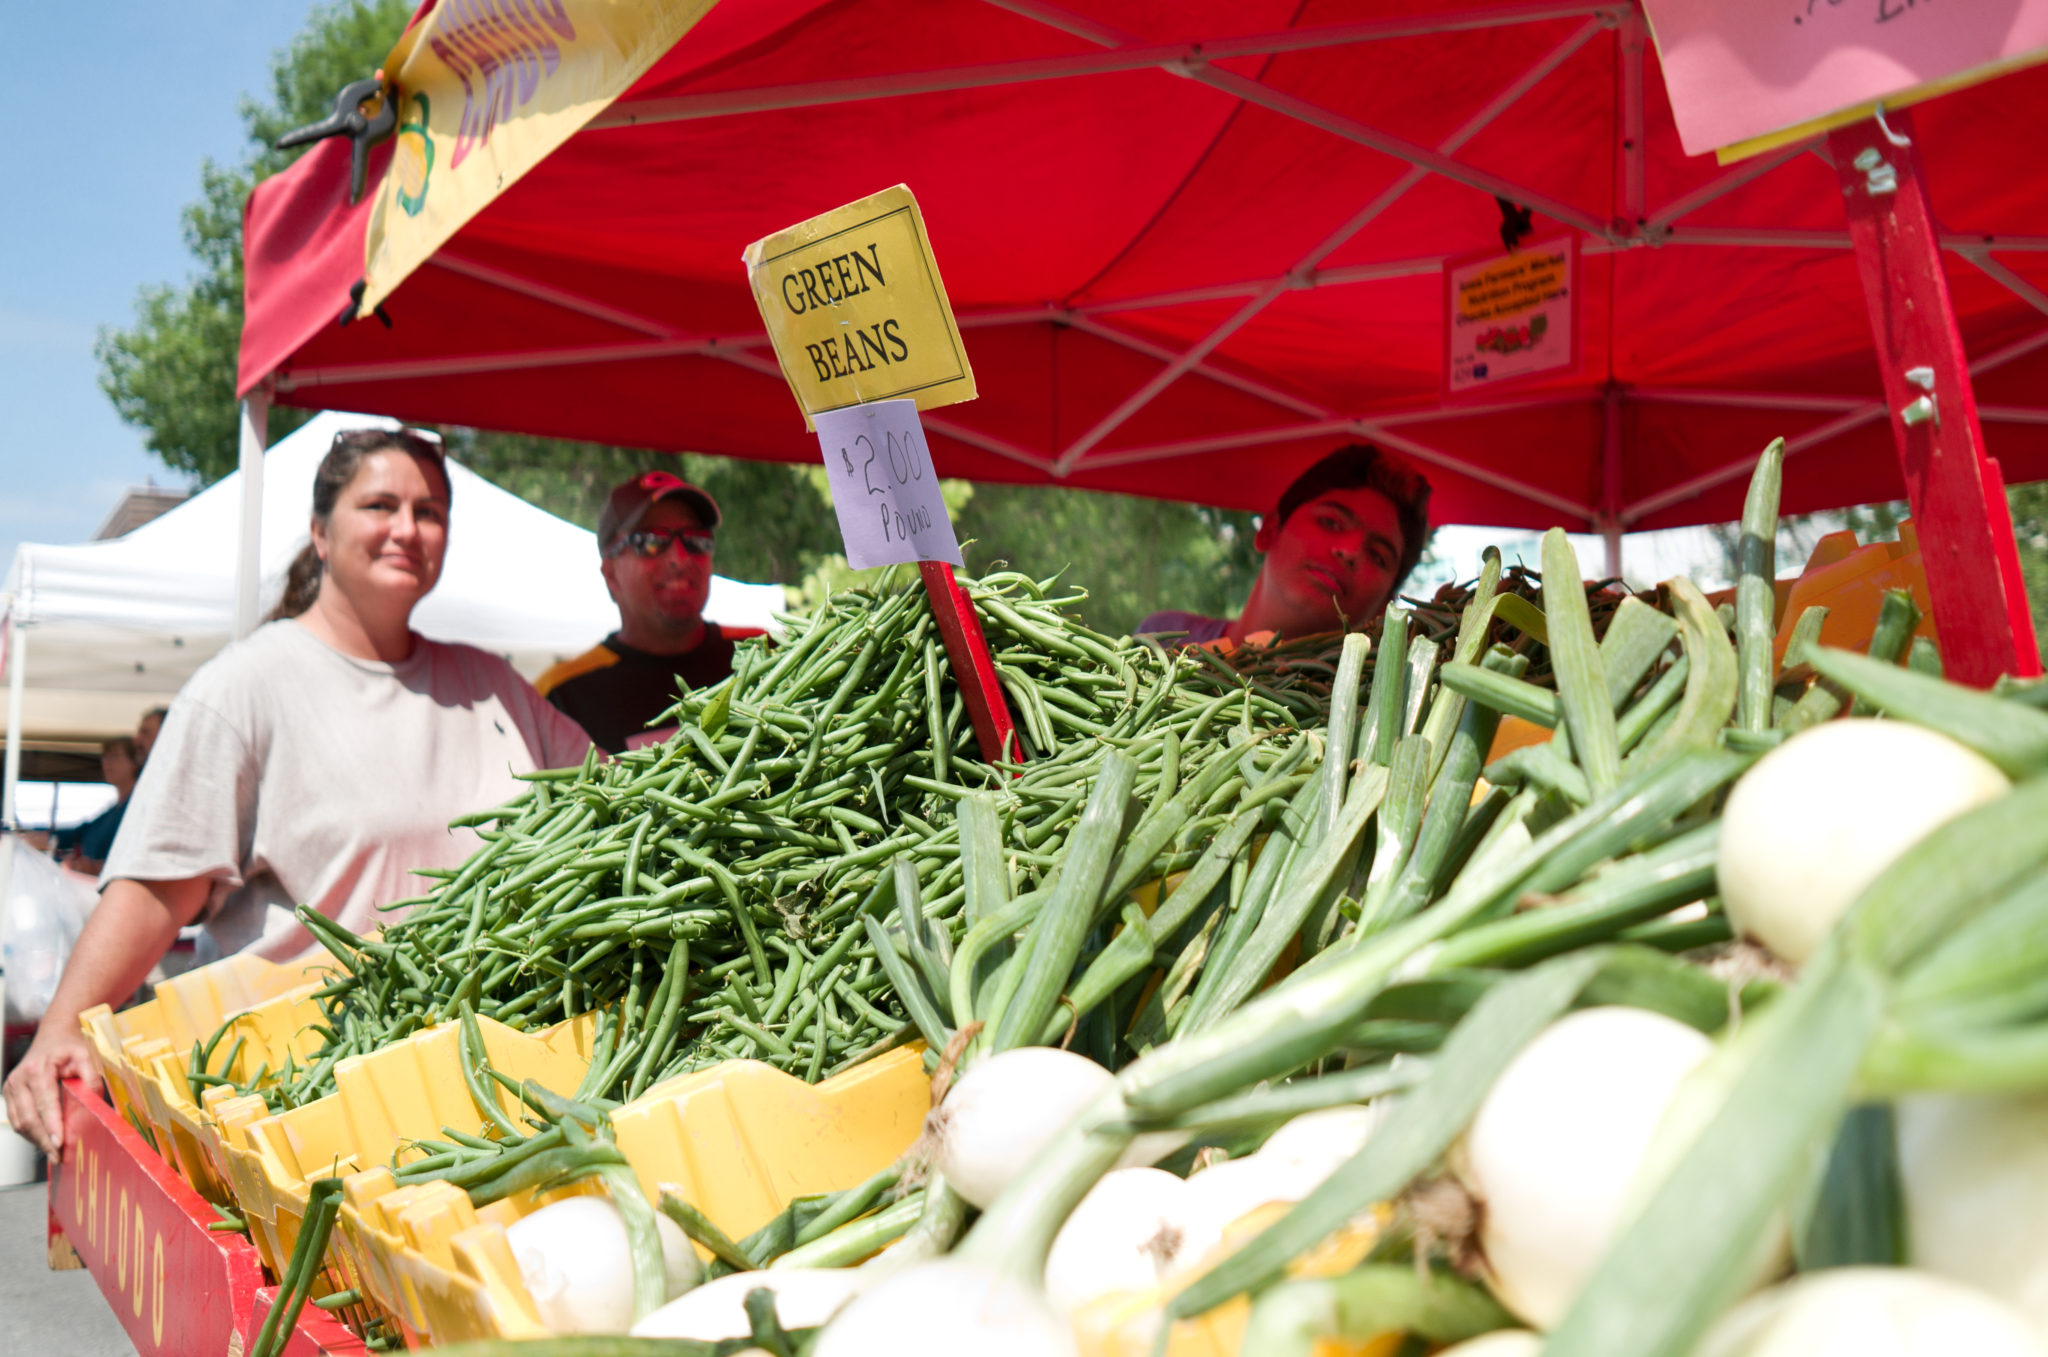 “Farmers' Market” by Phil Roeder is licensed under CC BY 2.0